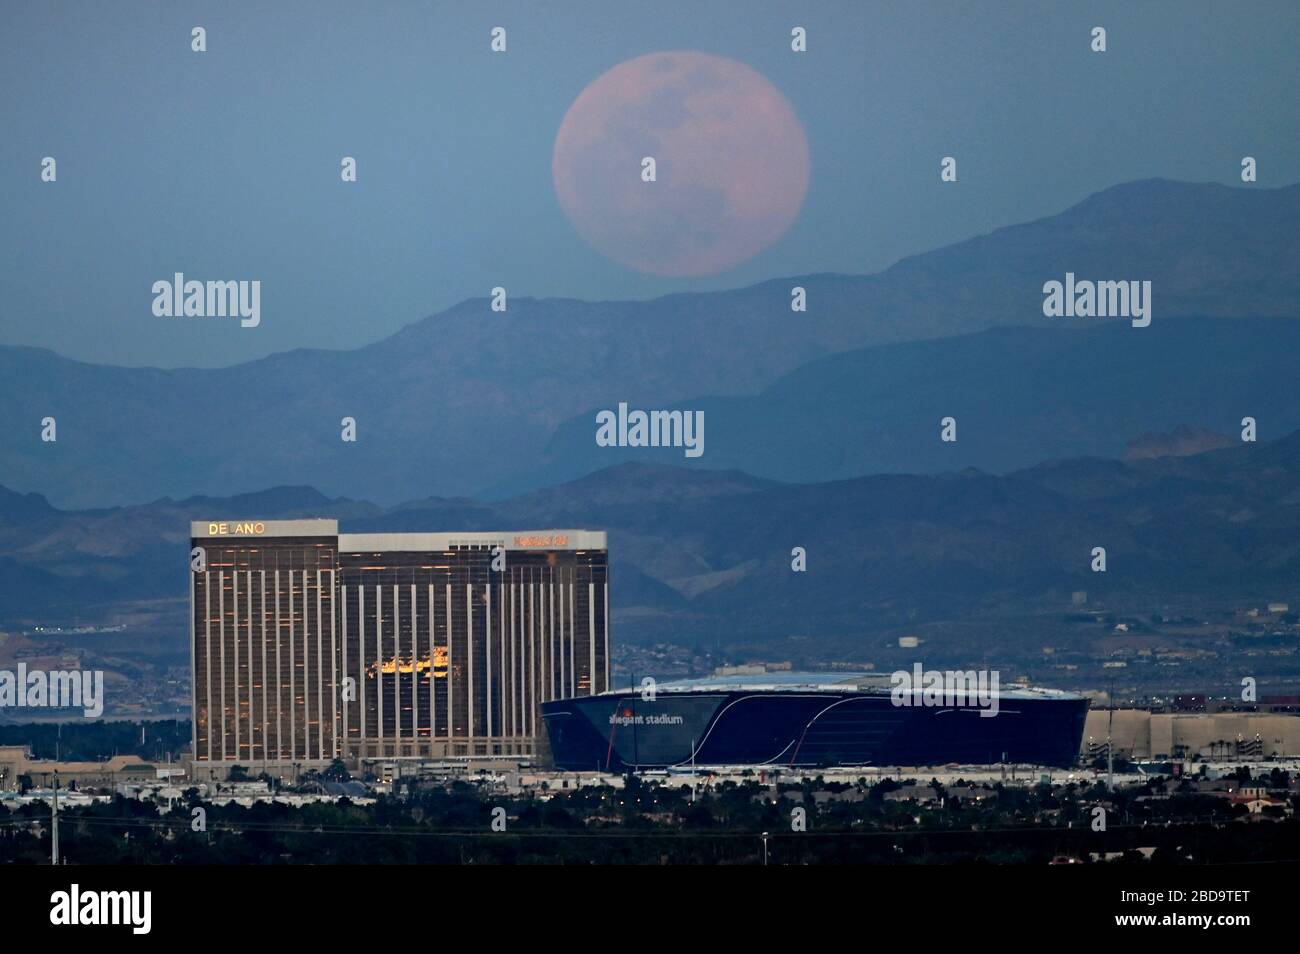 Las Vegas, Nevada, USA. 7th Apr, 2020. The super pink moon, the biggest supermoon of the year, rises over (L-R) Delano Las Vegas at Mandalay Bay Resort and Casino, Mandalay Bay Resort and Casino and the under construction Allegiant Stadium on April 7, 2020 in Las Vegas, Nevada. The pink moon got its name because the April full moon occurs at the same time as the pink wildflower Phlox subulata blooms in North America. A supermoon occurs when a full moon coincides with its perigee, which is its closest approach to the Earth. Credit: David Becker/ZUMA Wire/Alamy Live News Stock Photo